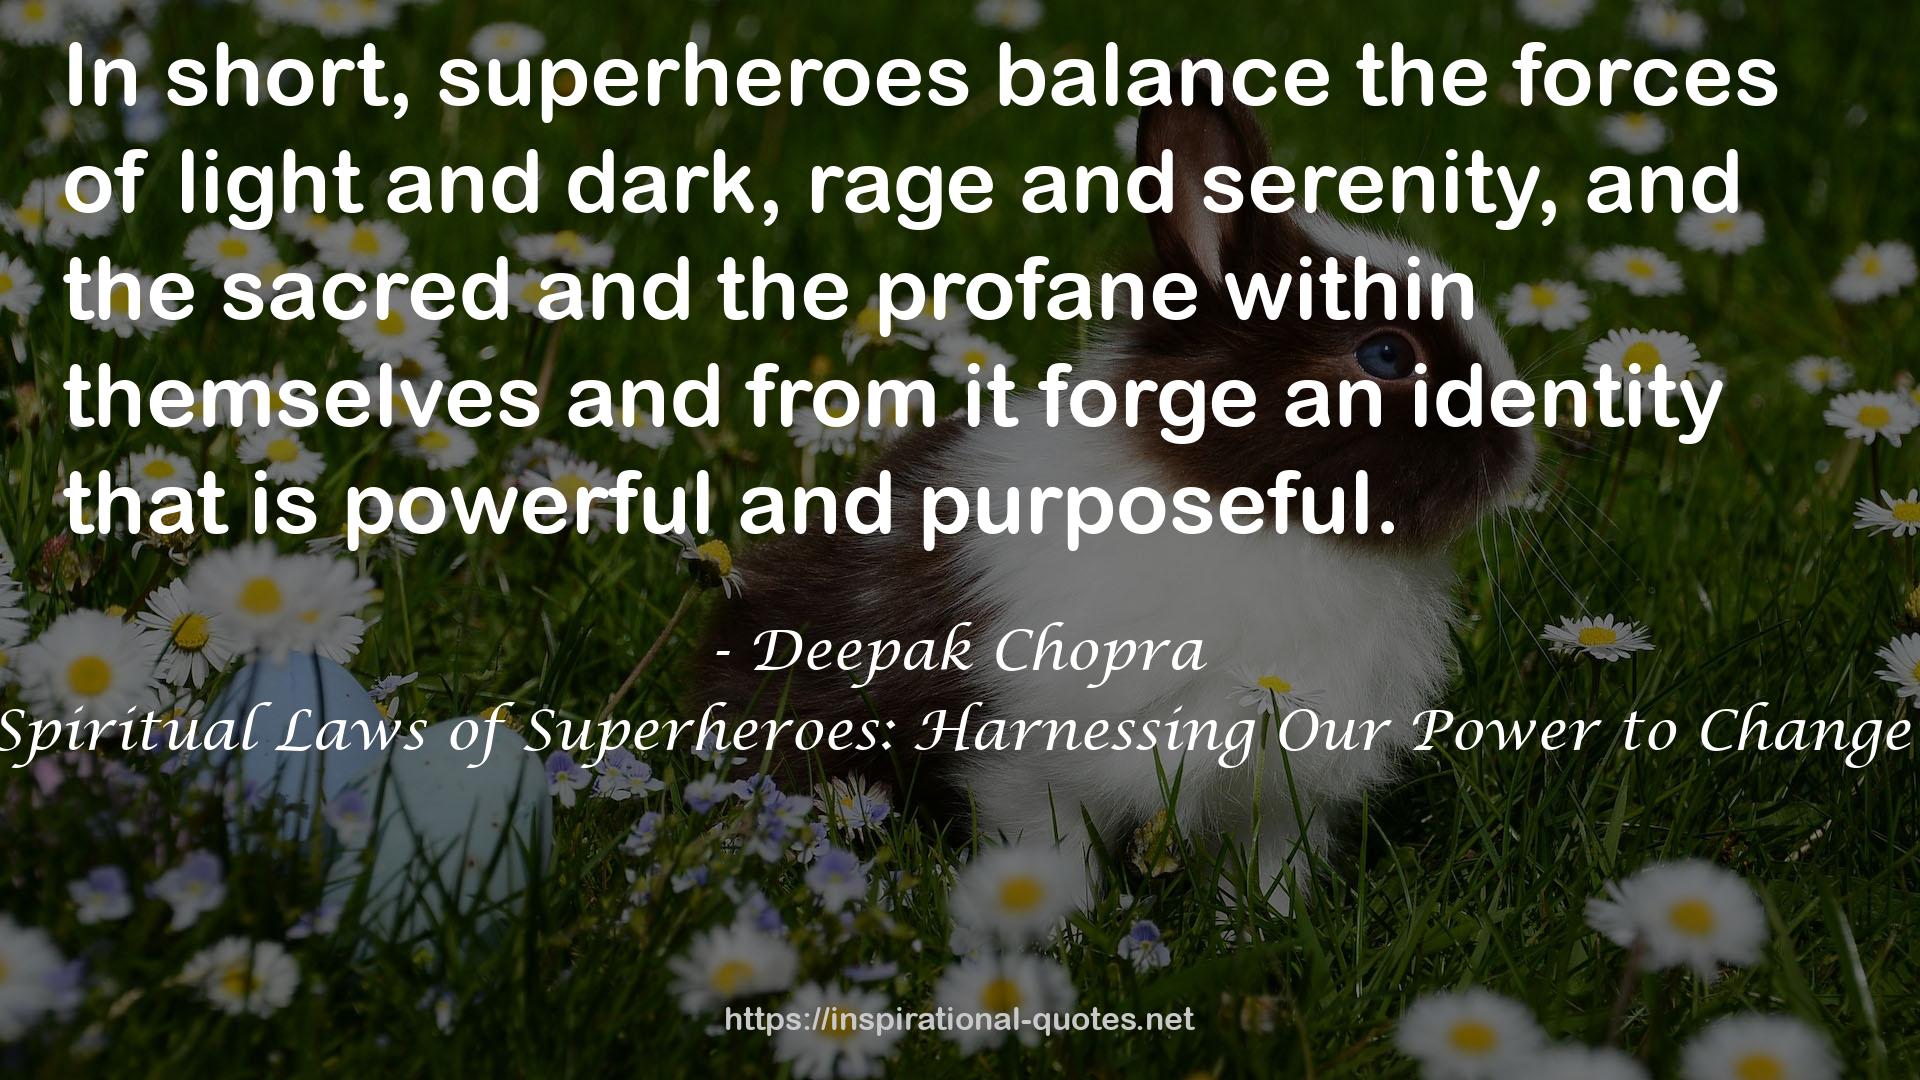 The Seven Spiritual Laws of Superheroes: Harnessing Our Power to Change the World QUOTES